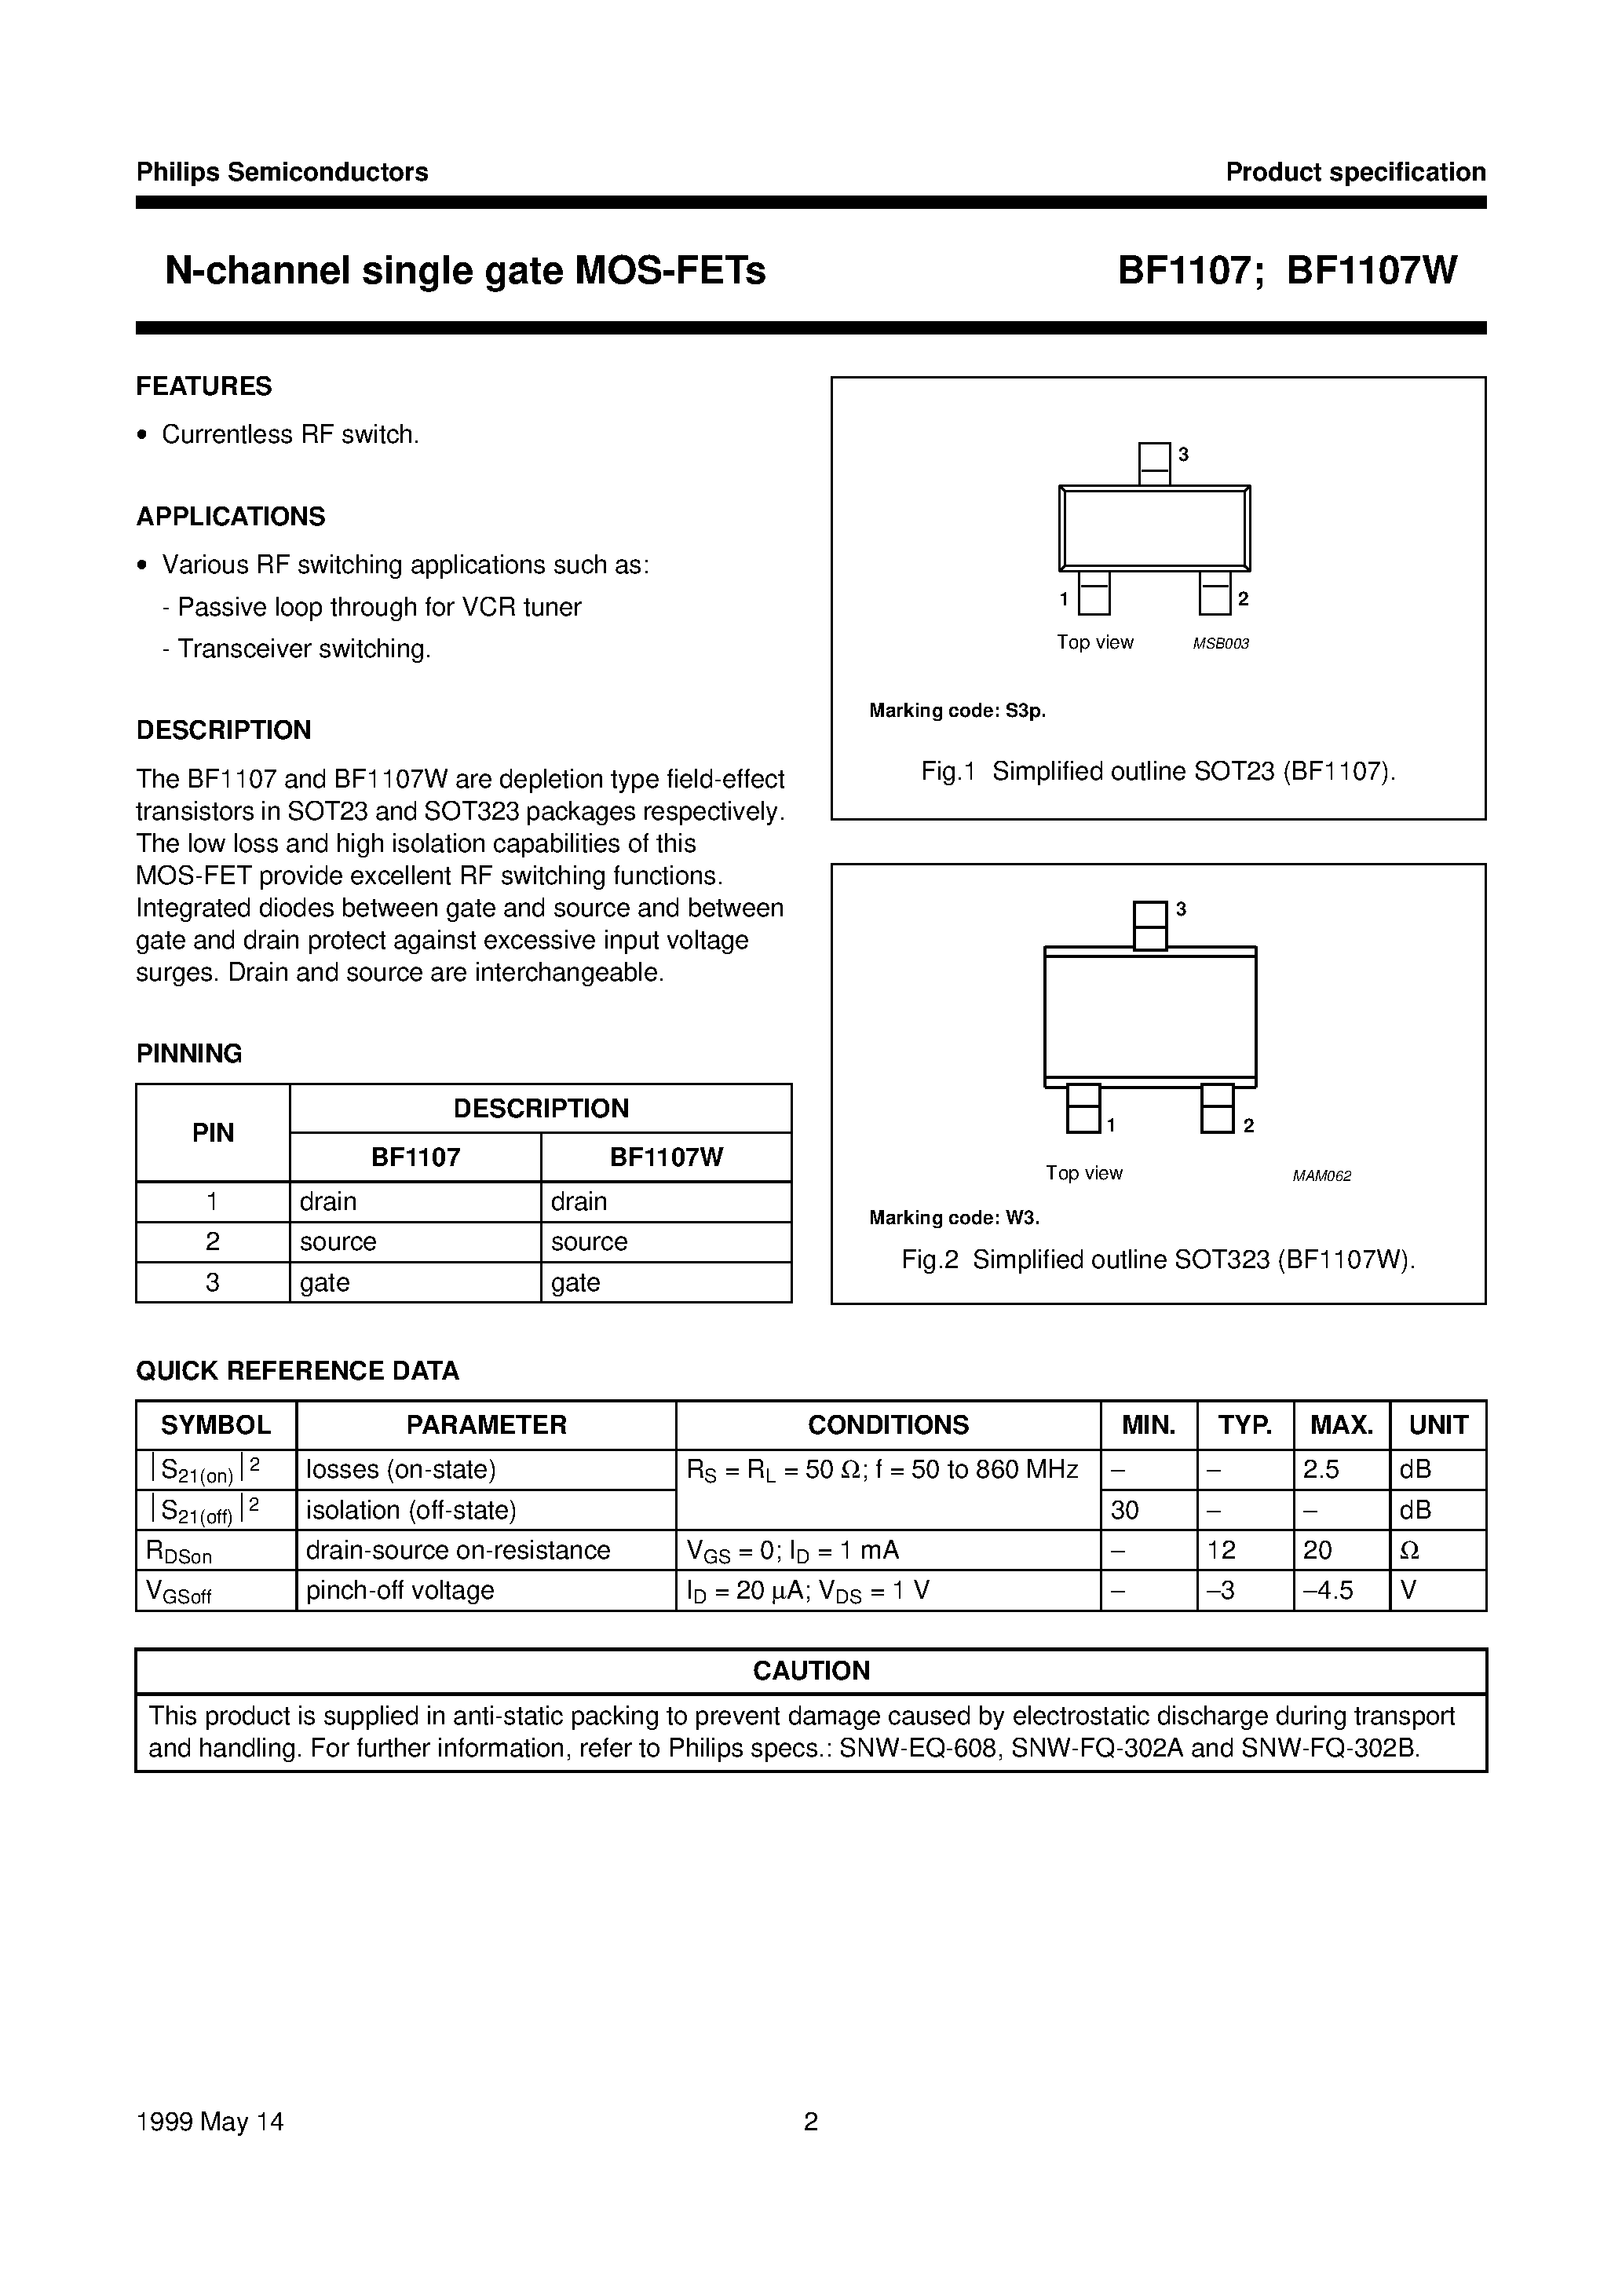 Datasheet BF1107W - N-channel single gate MOS-FETs page 2